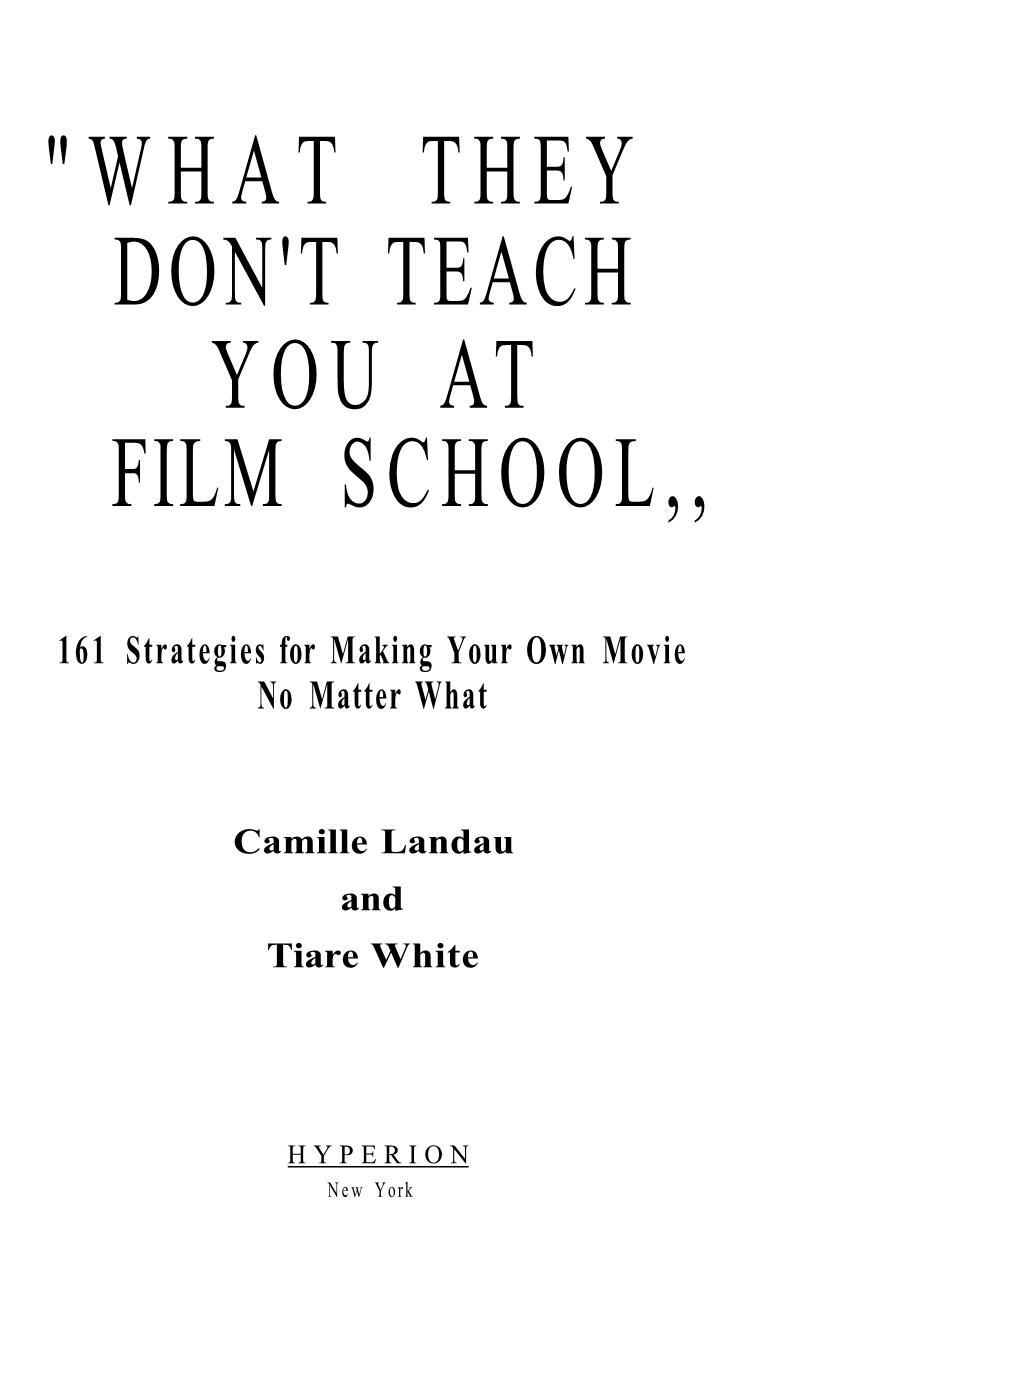 "What They Don't Teach You at Film School